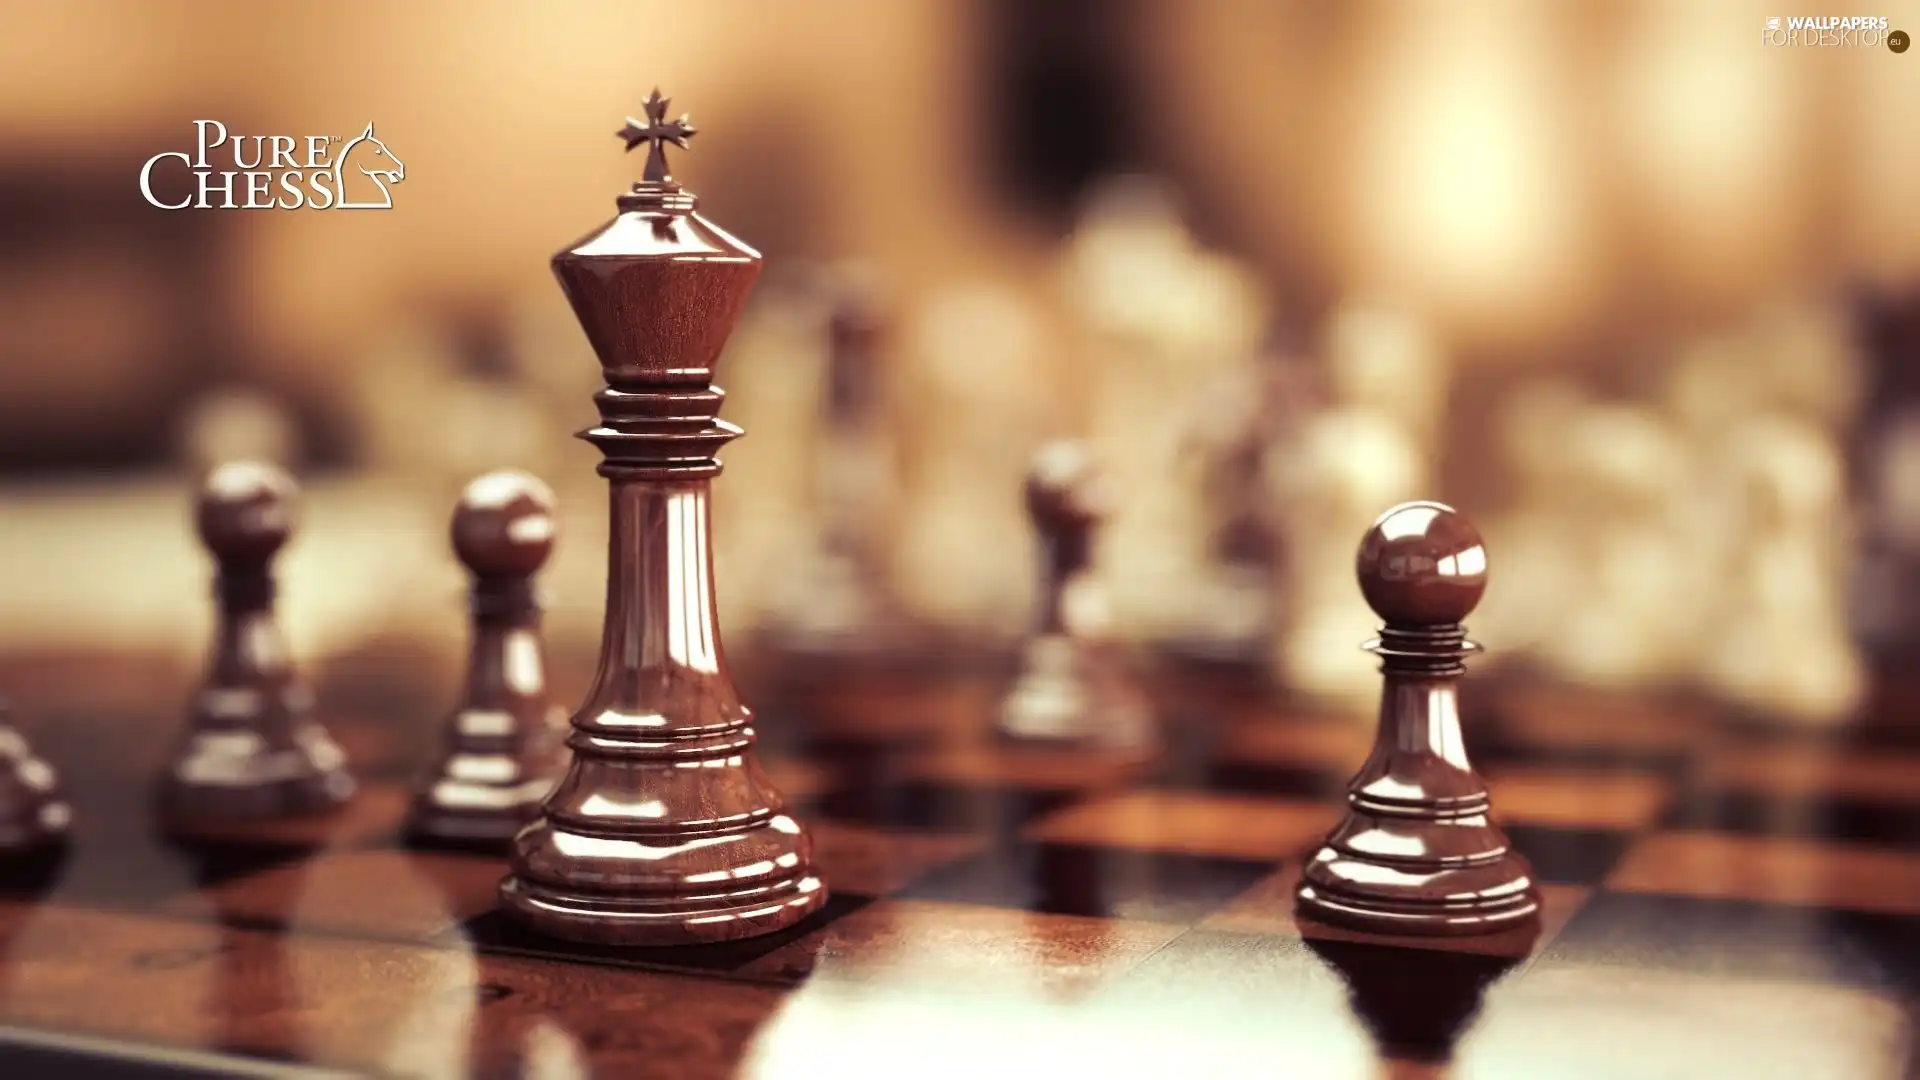 board, chess, Video, Pure Chess, game